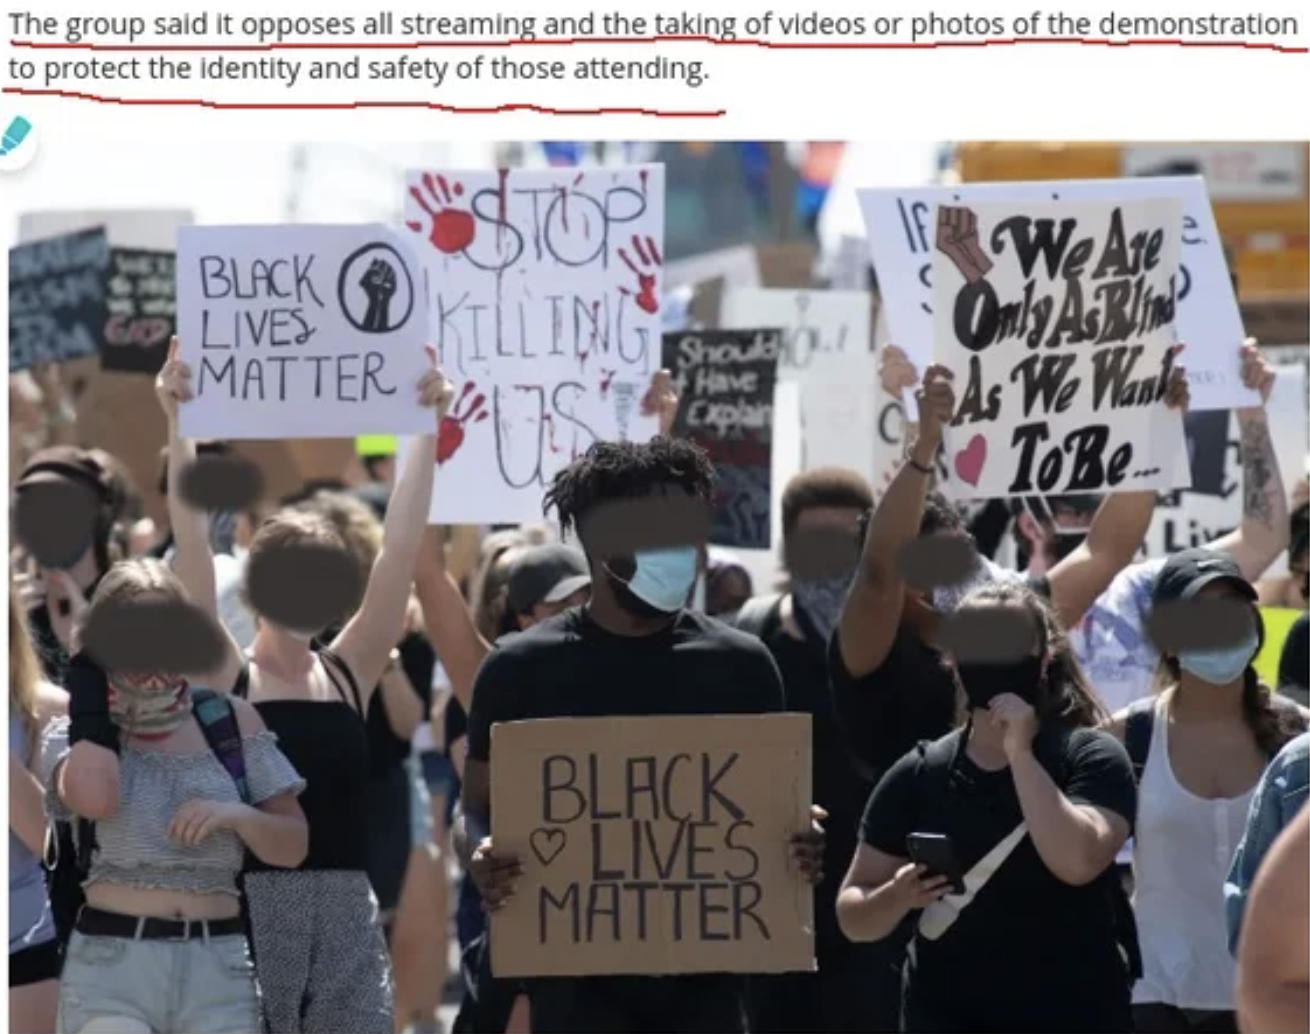 People Who Didn't Do Their Only Job - black lives matter protest ottawa - The group said it opposes all streaming and the taking of videos or photos of the demonstration to protect the identity and safety of those attending. Black Lives Matter Str Killing